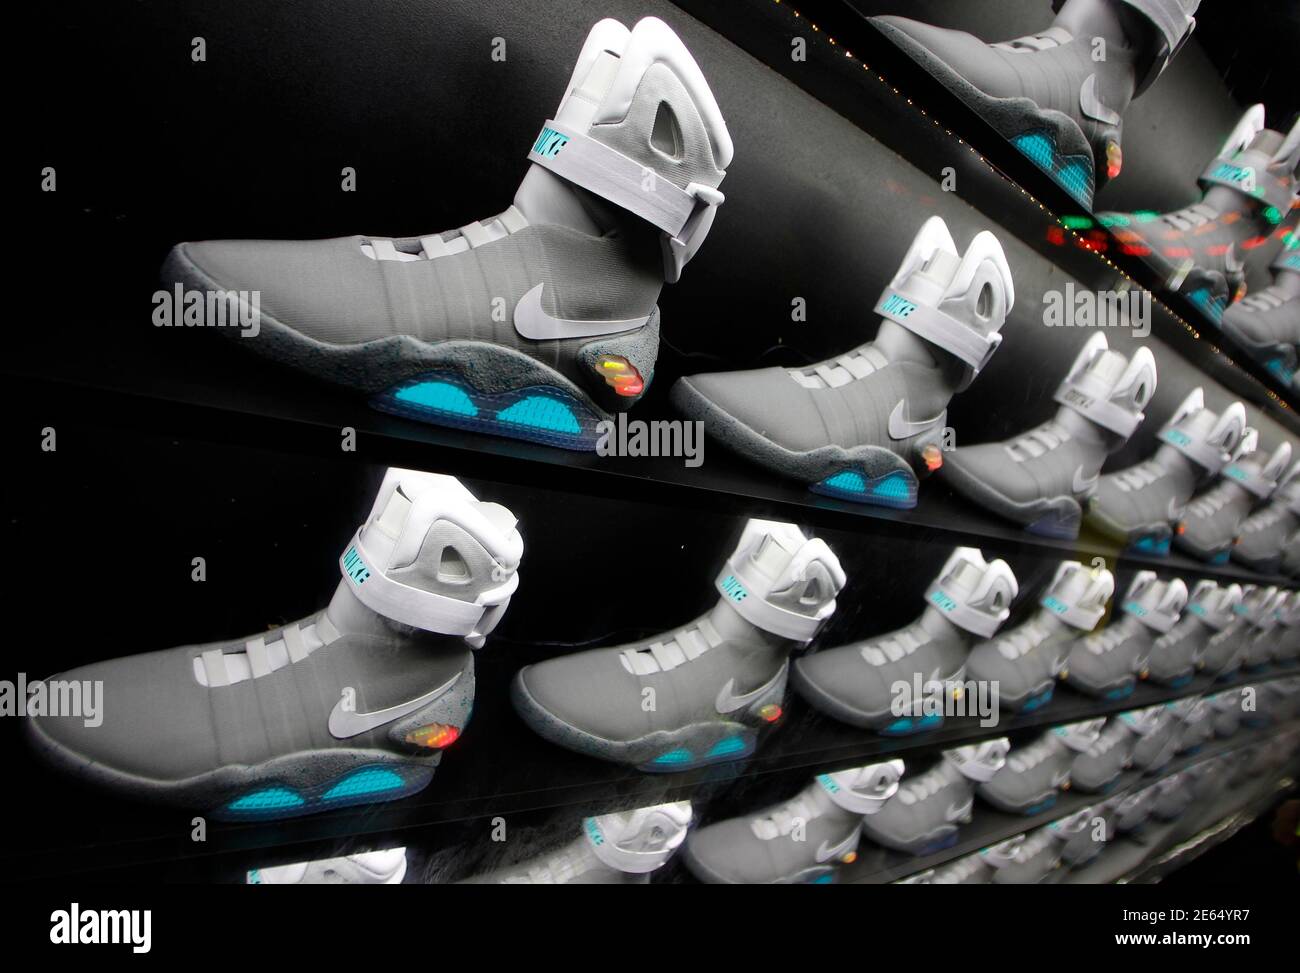 2011 NIKE MAG shoes, based on the original NIKE MAG worn in 2015 by the " Back to the Future" character Marty McFly, played by Michael J. Fox, is  displayed during its unveiling